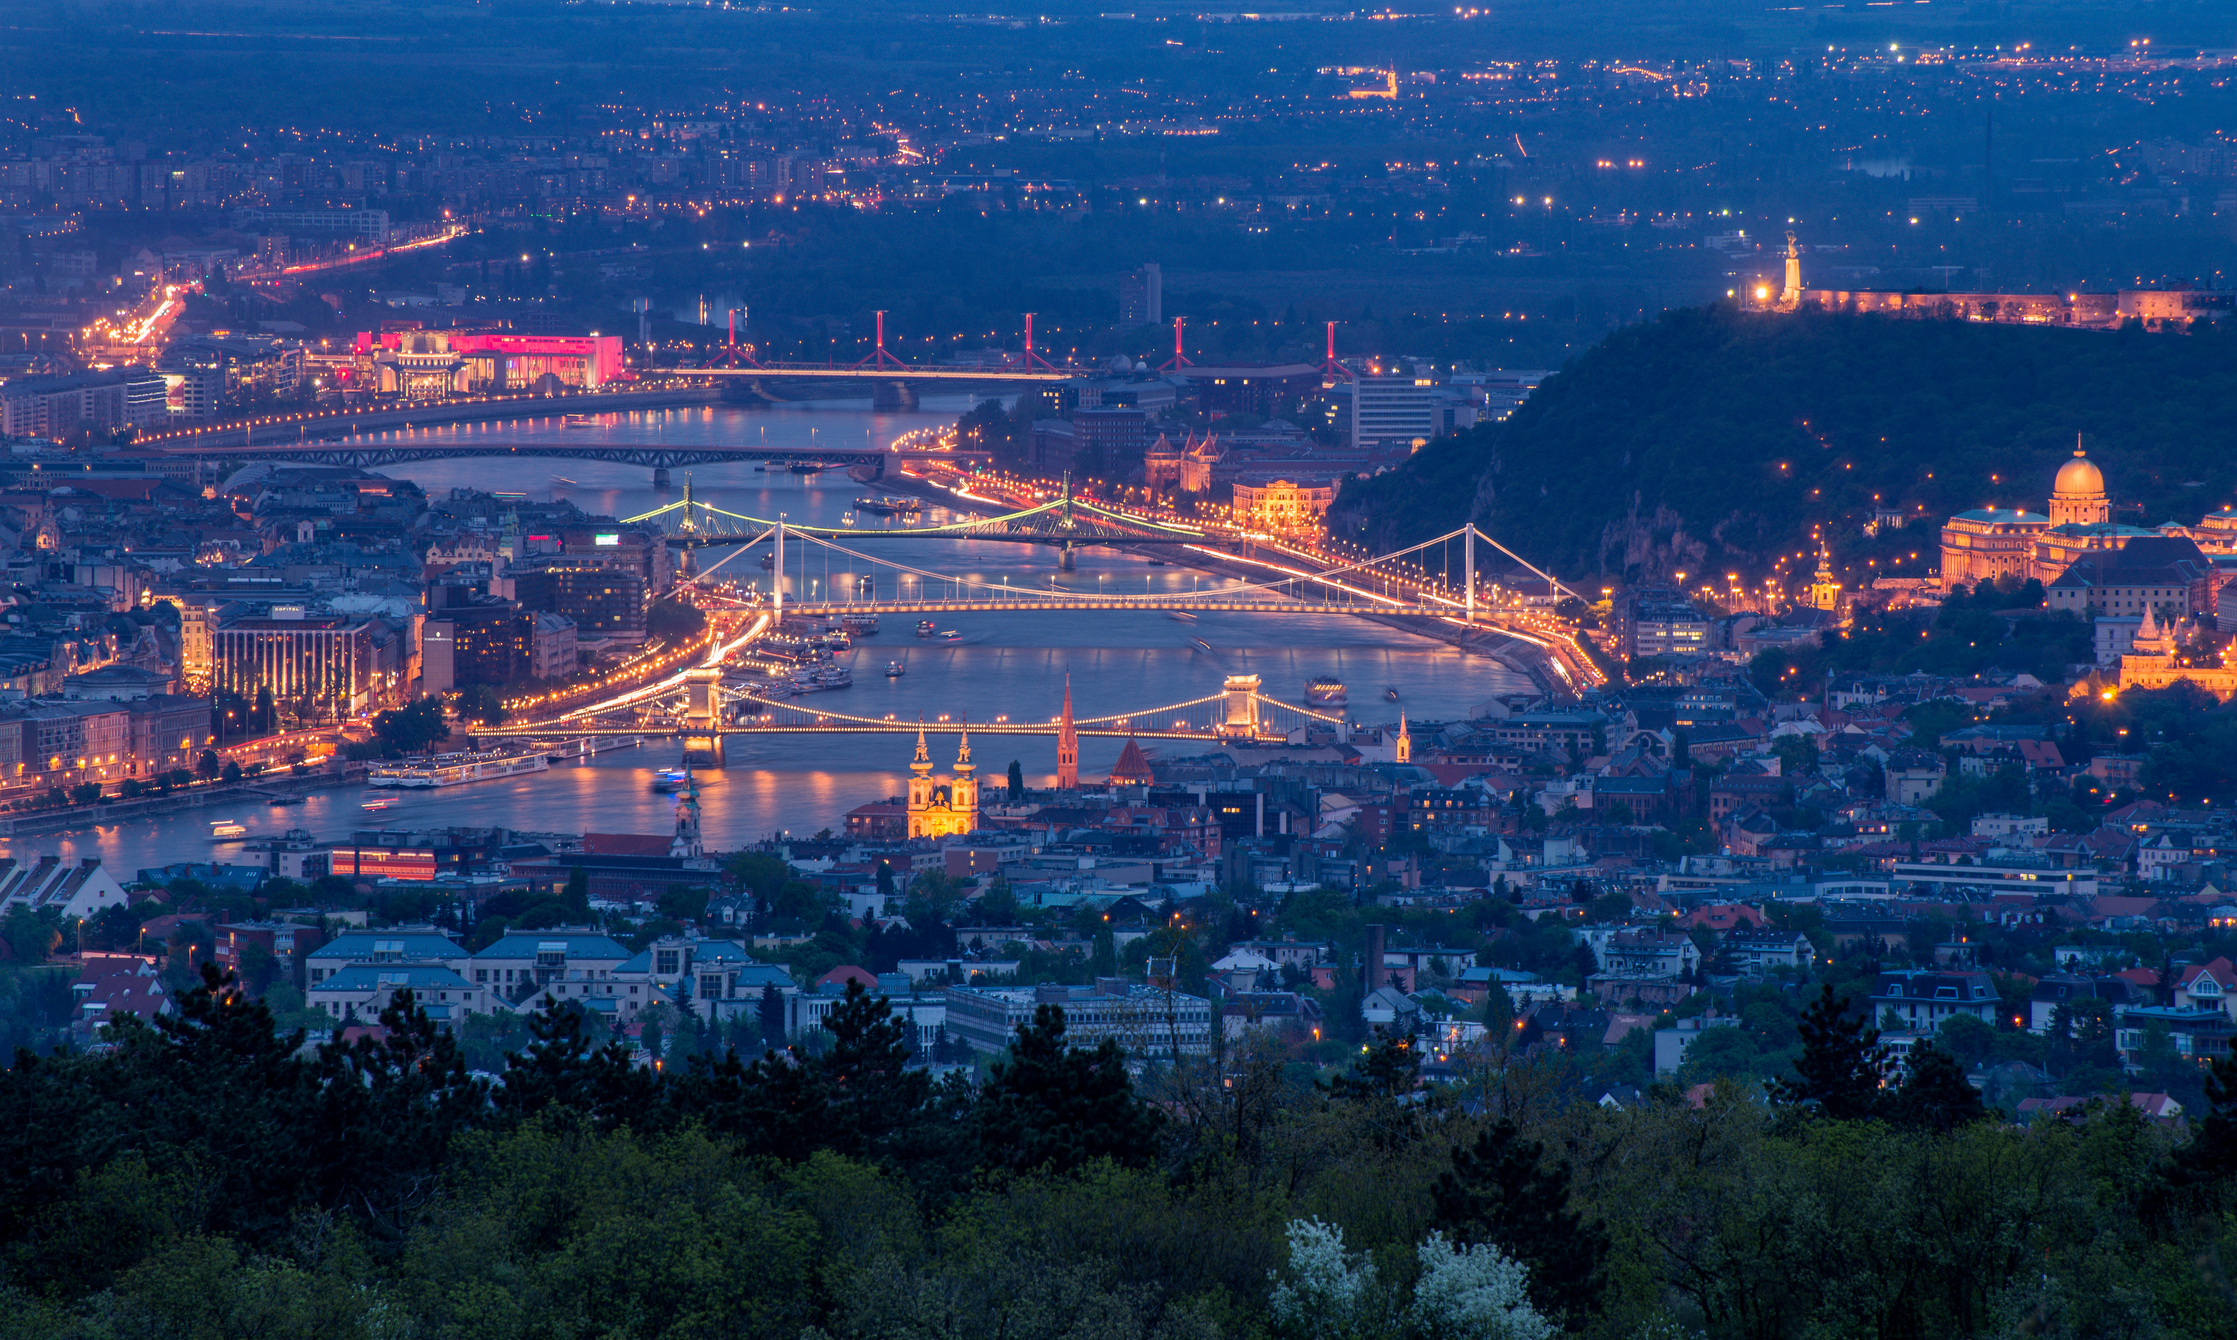 Panoramic view over the city of Budapest, Hungary